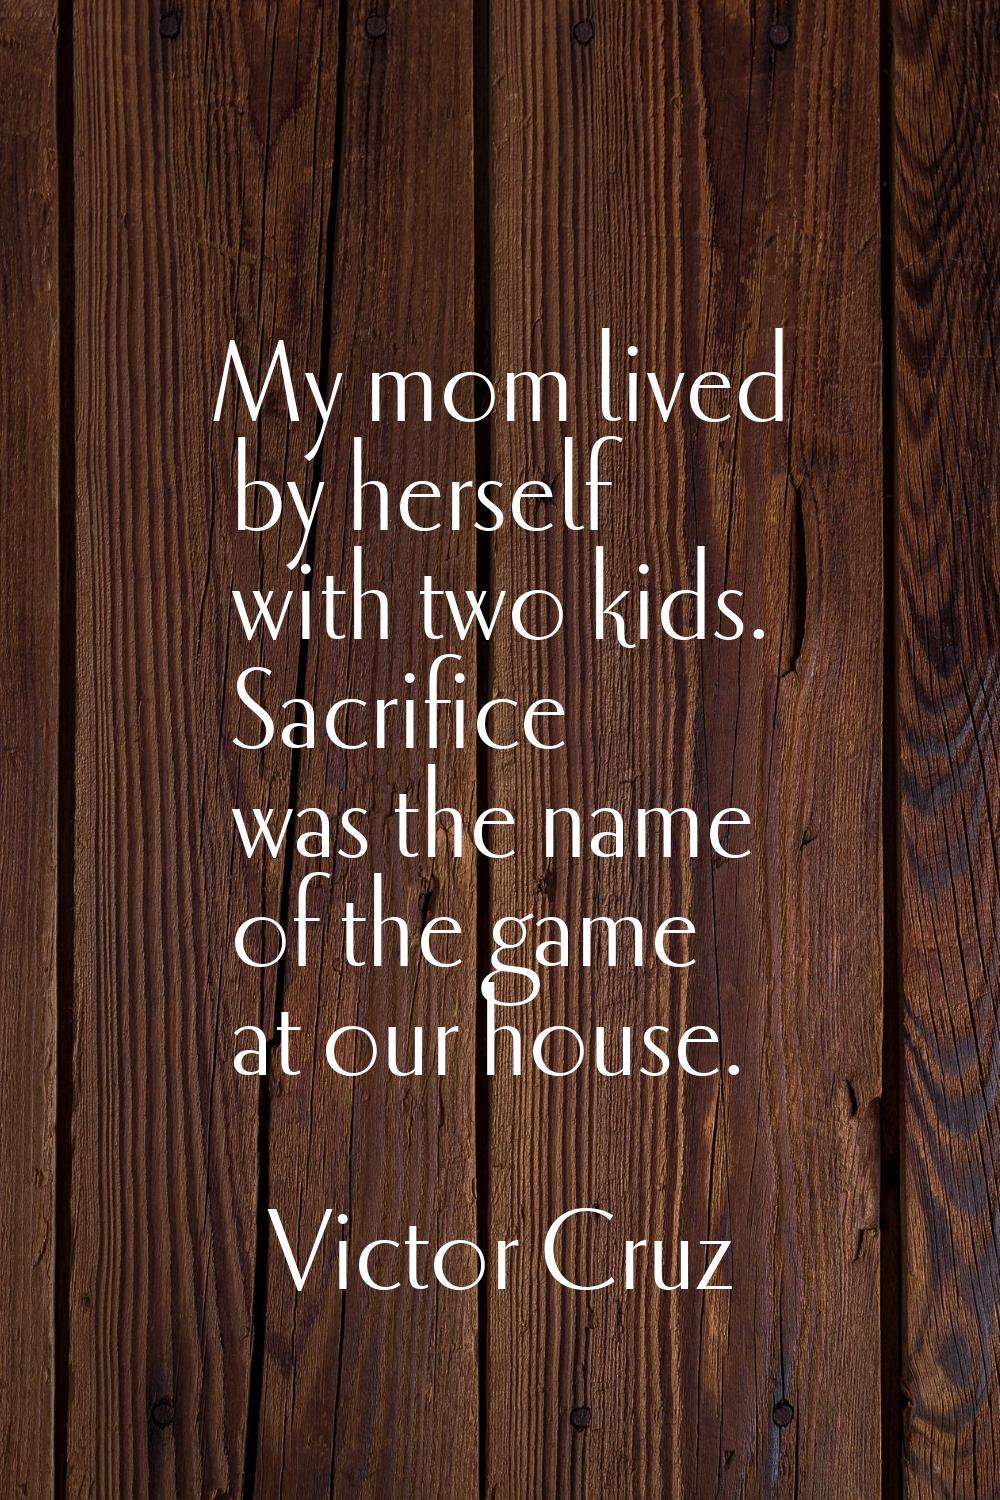 My mom lived by herself with two kids. Sacrifice was the name of the game at our house.